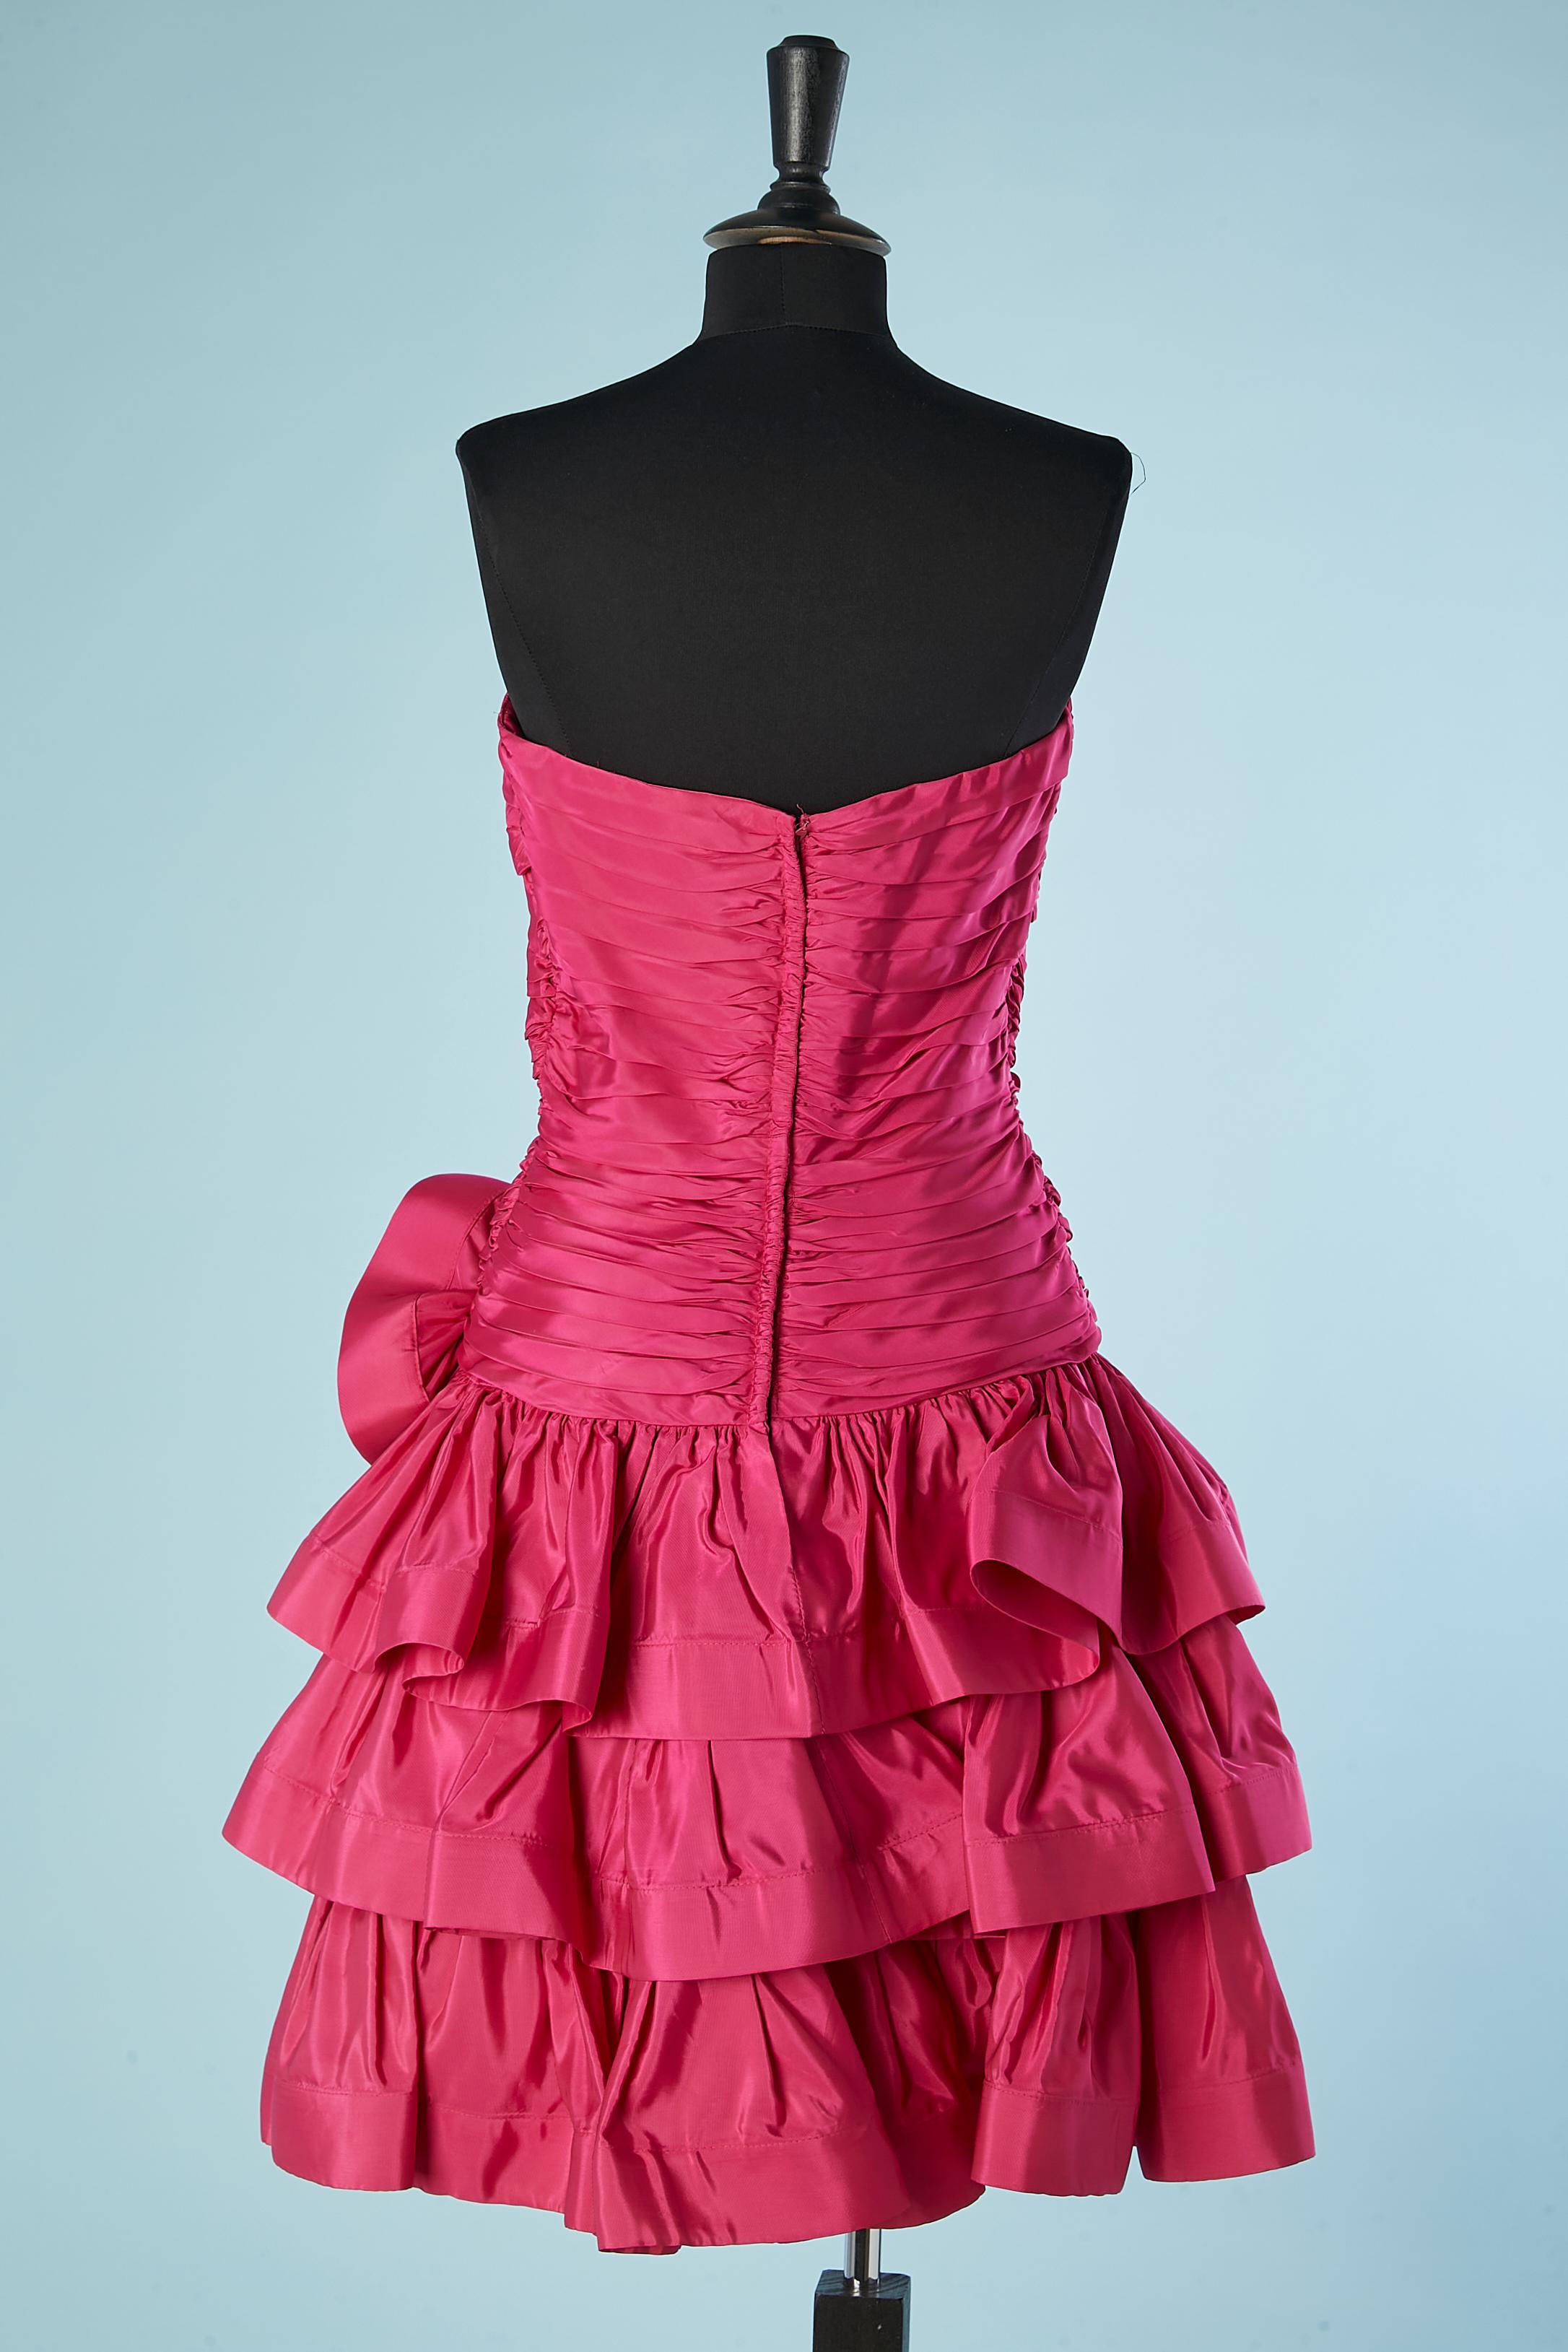 Shocking pink draped cocktail dress with ruffles Lillie Rubin Circa 1980 For Sale 1